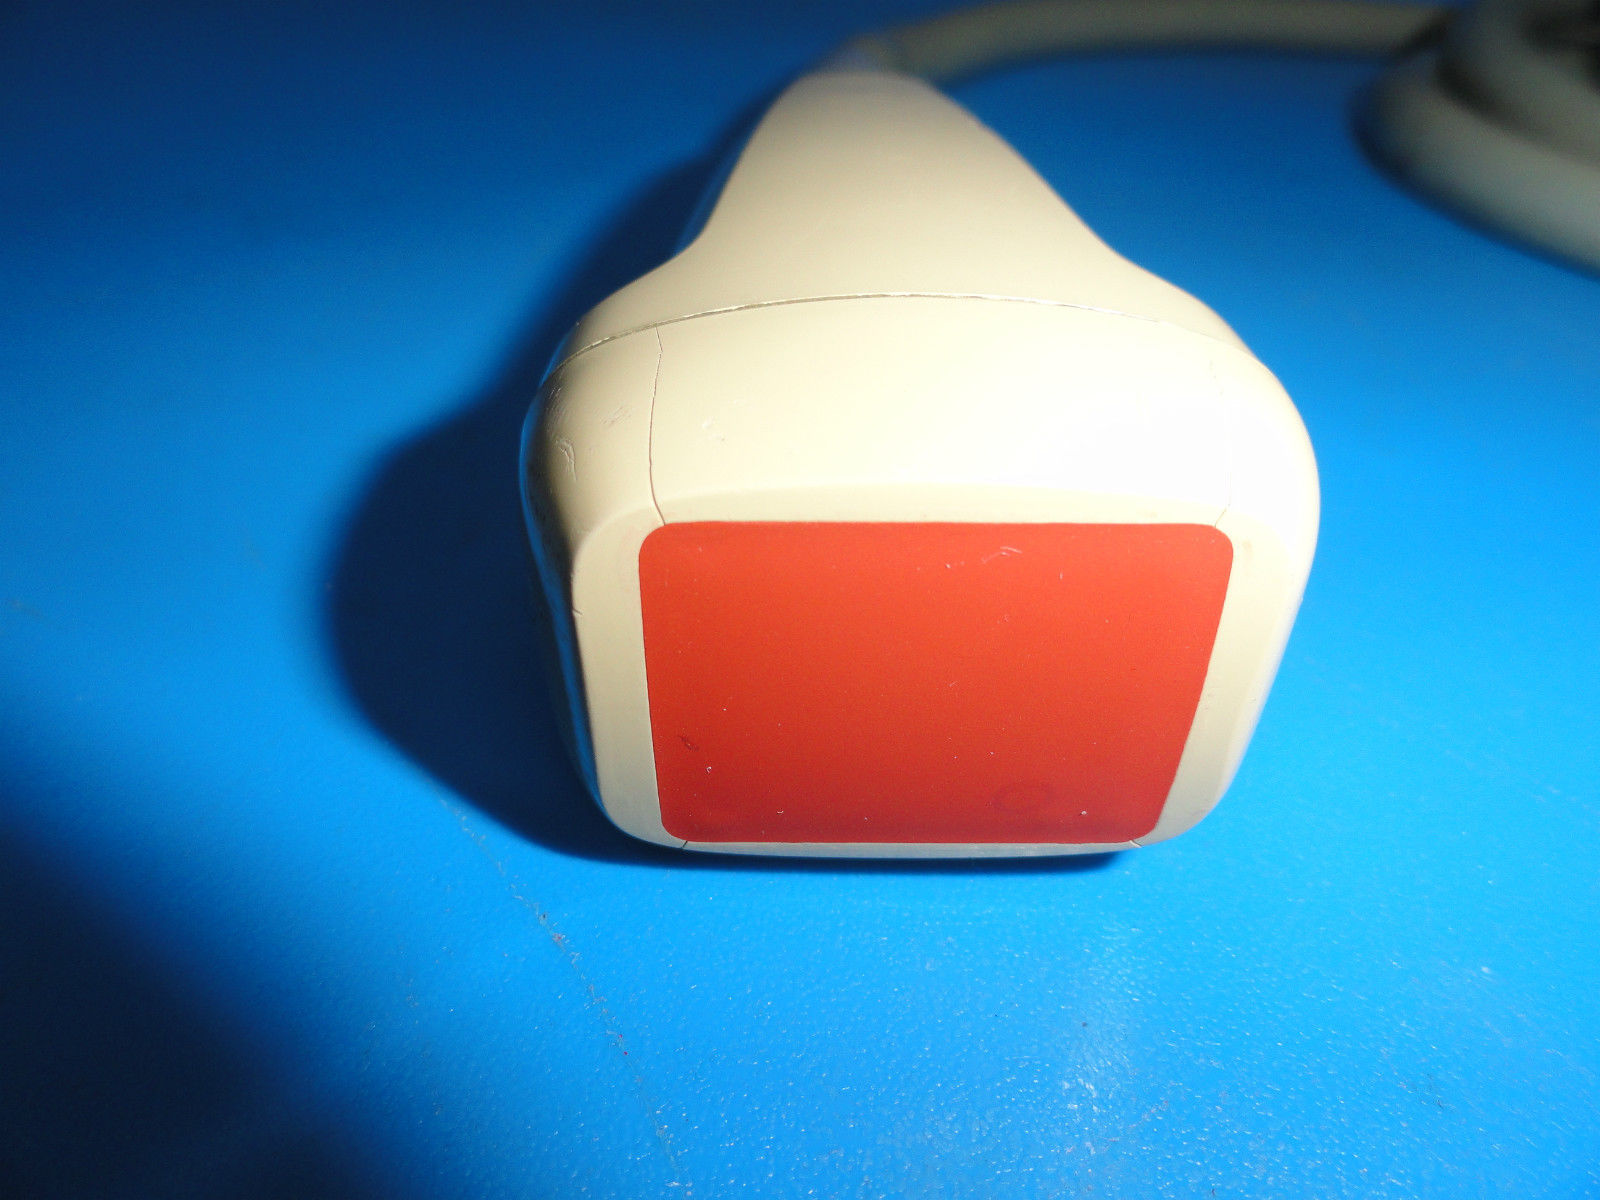 a close up of a red and white object on a blue surface